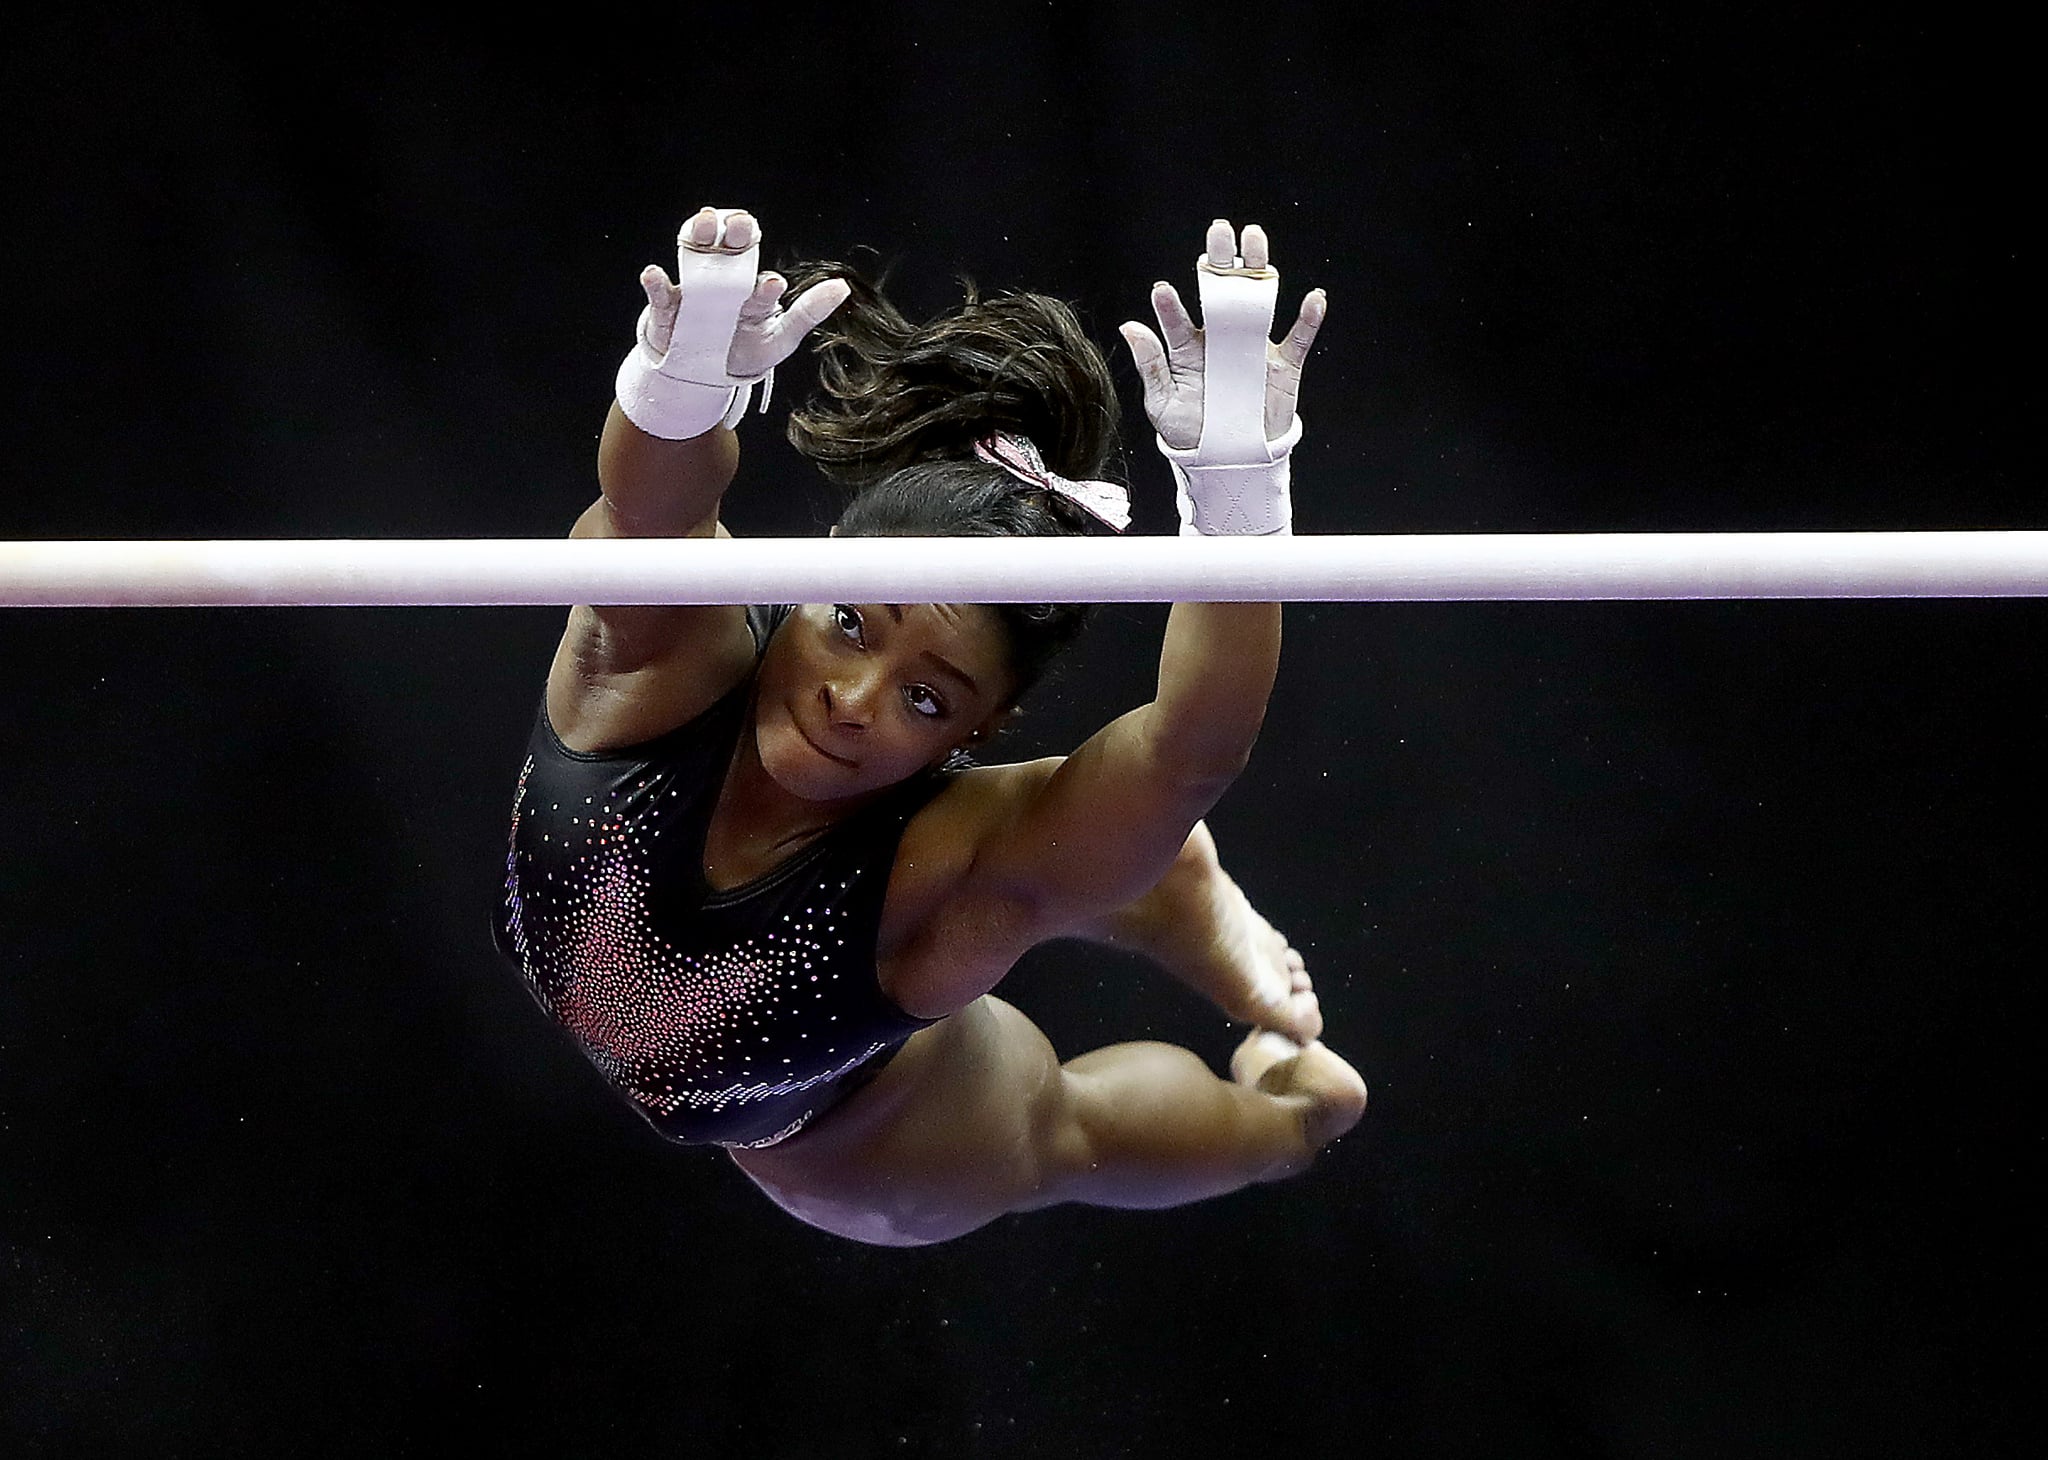 KANSAS CITY, MISSOURI - AUGUST 11:  Simone Biles warms up on the uneven bars prior to the Women's Senior competition of the 2019 U.S. Gymnastics Championships at the Sprint Centre on August 11, 2019 in Kansas City, Missouri. (Photo by Jamie Squire/Getty Images)